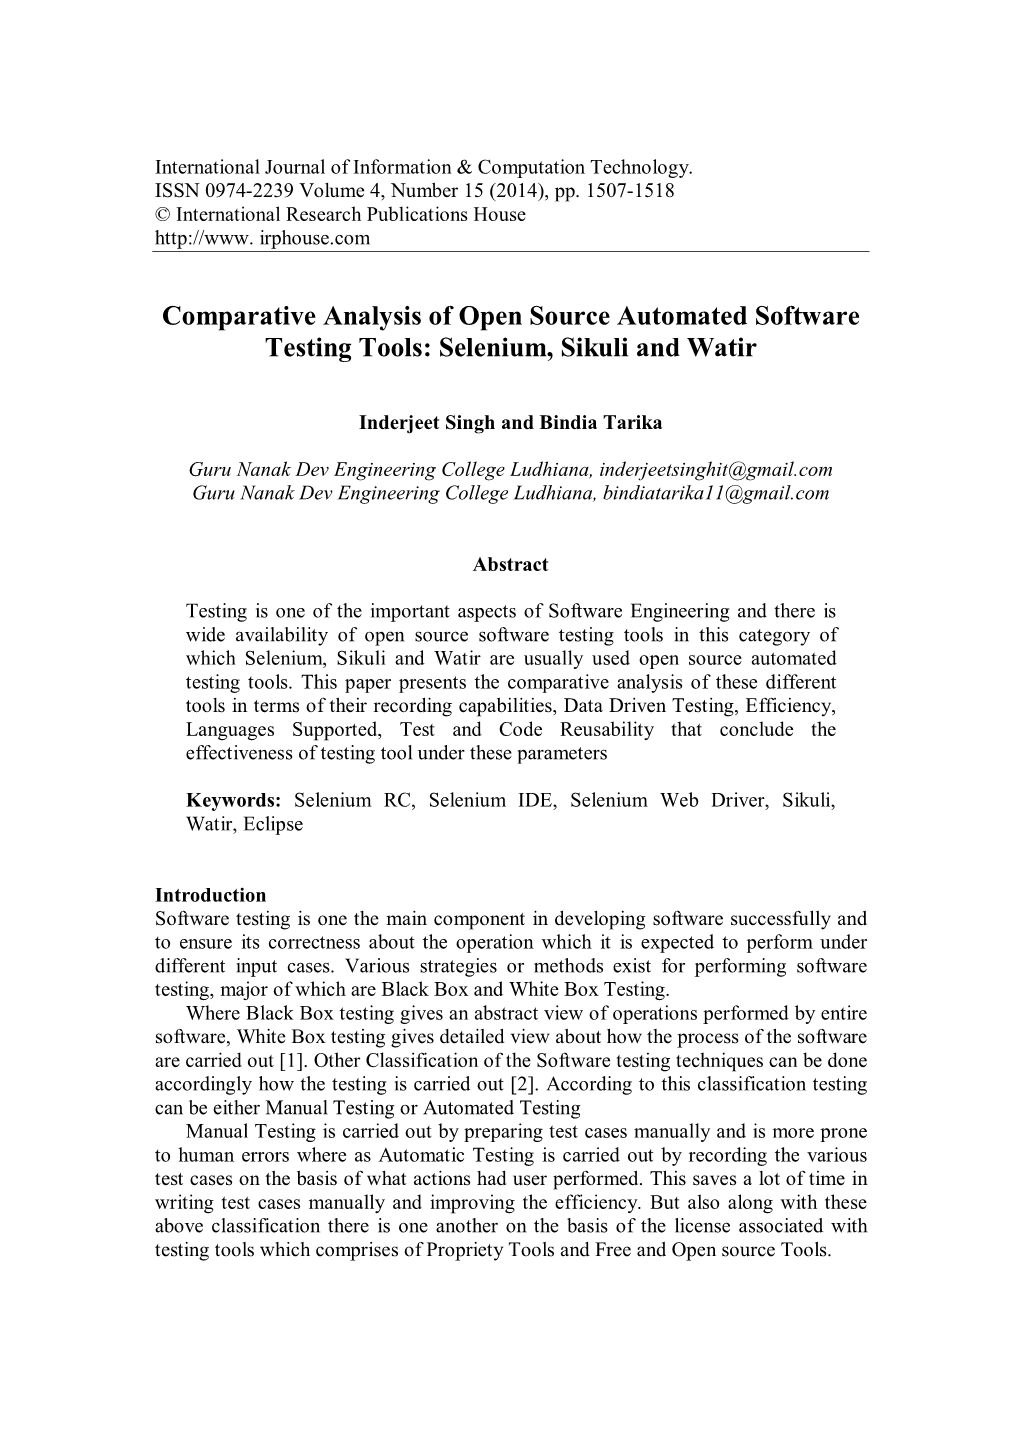 Comparative Analysis of Open Source Automated Software Testing Tools: Selenium, Sikuli and Watir